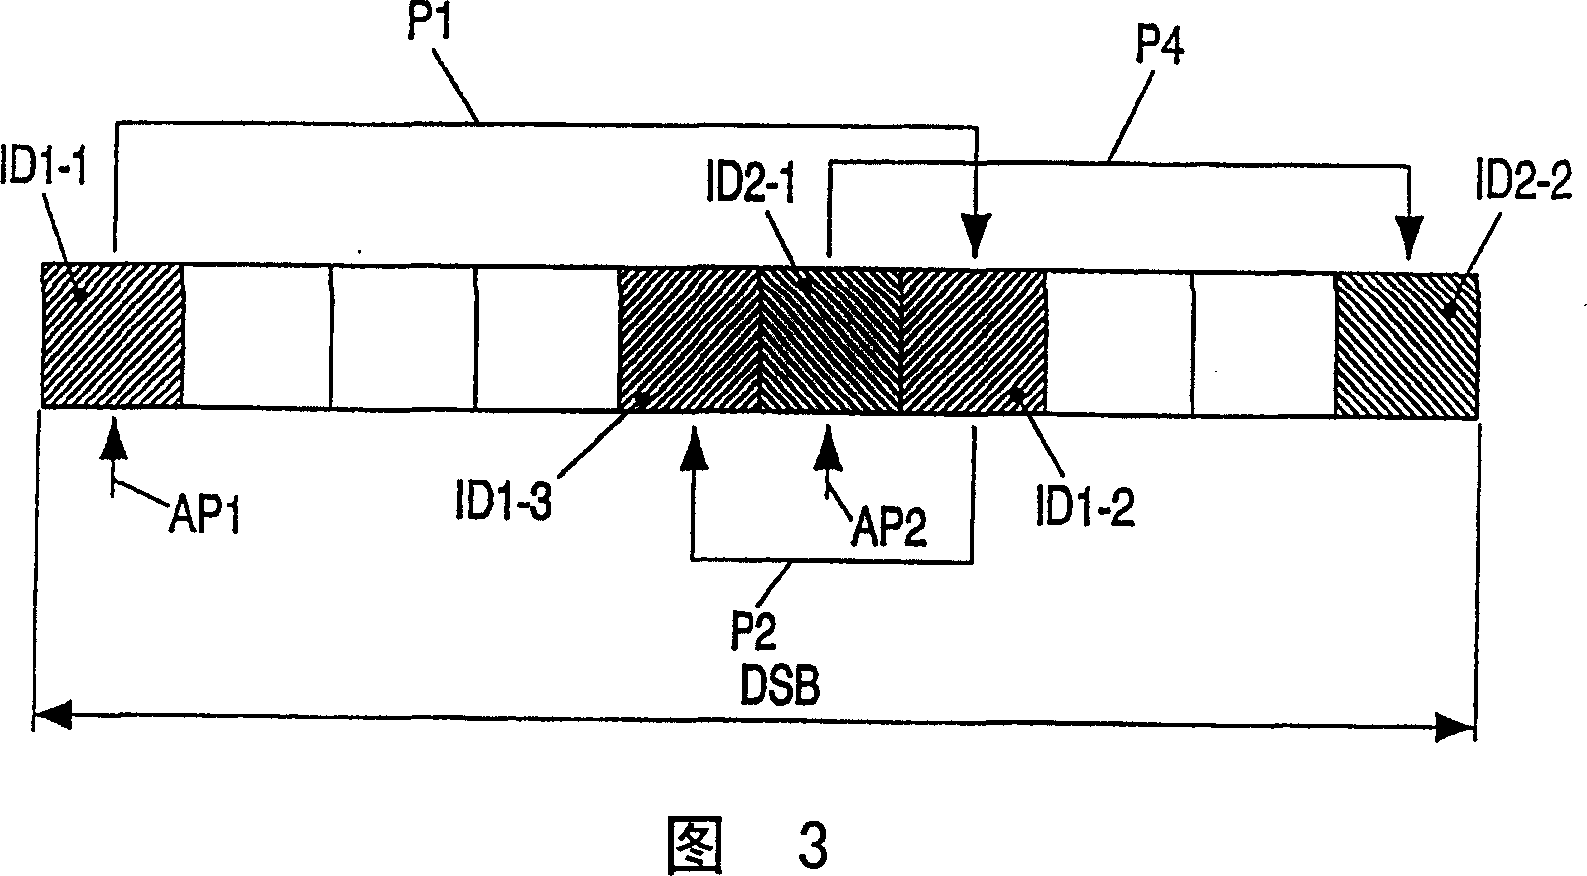 Management device and method for a mass storage